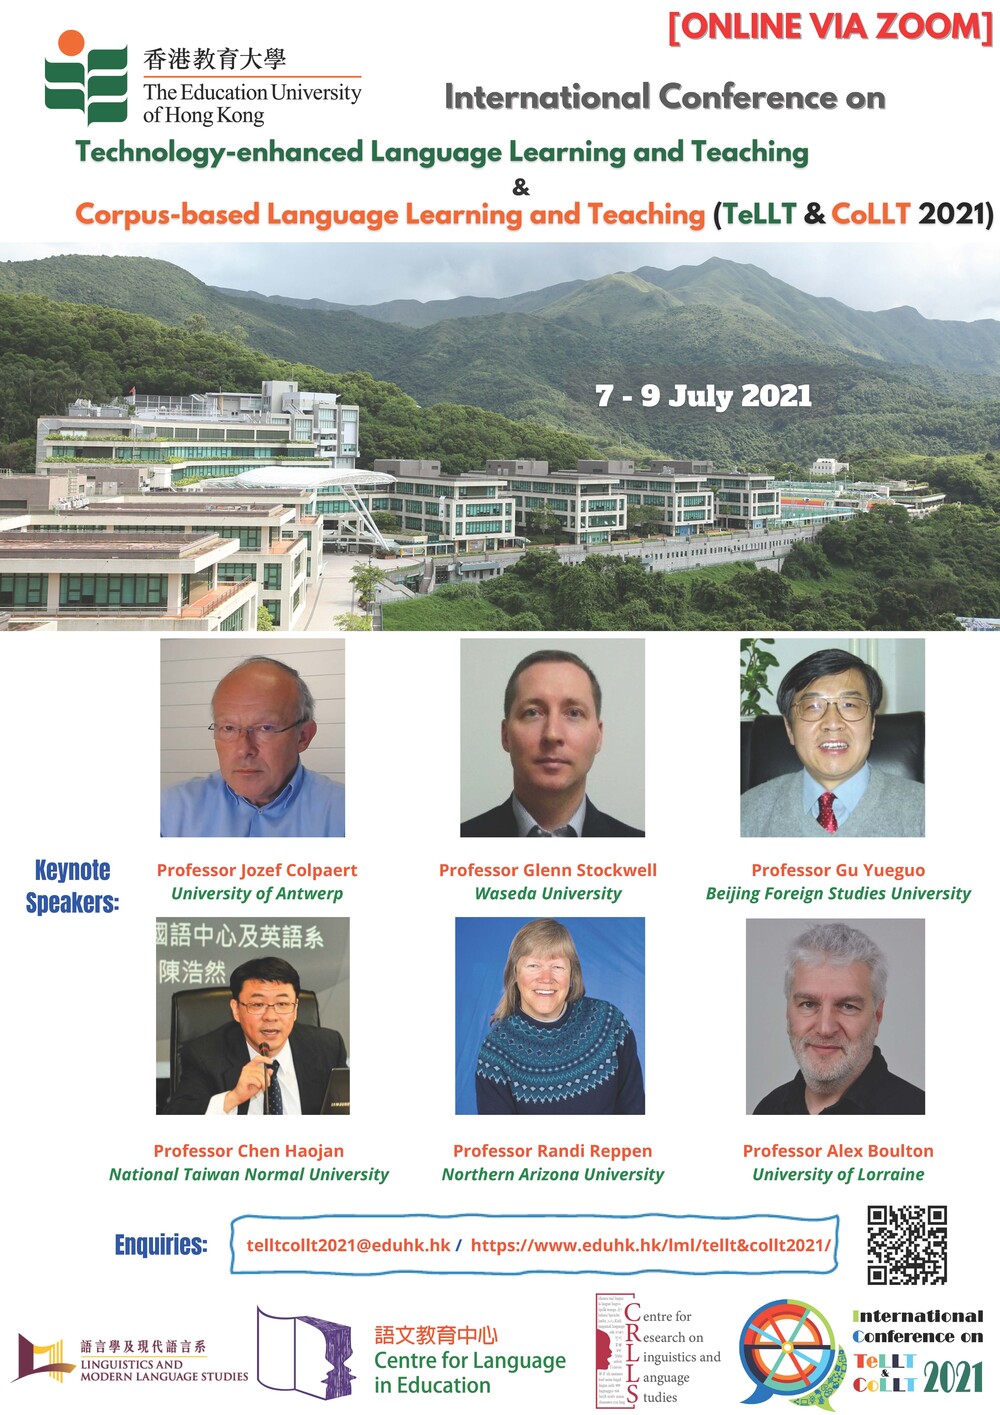 The International Conference on Technology-enhanced Language Learning and Teaching & Corpus-based Language Learning and Teaching (TeLLT & CoLLT 21)